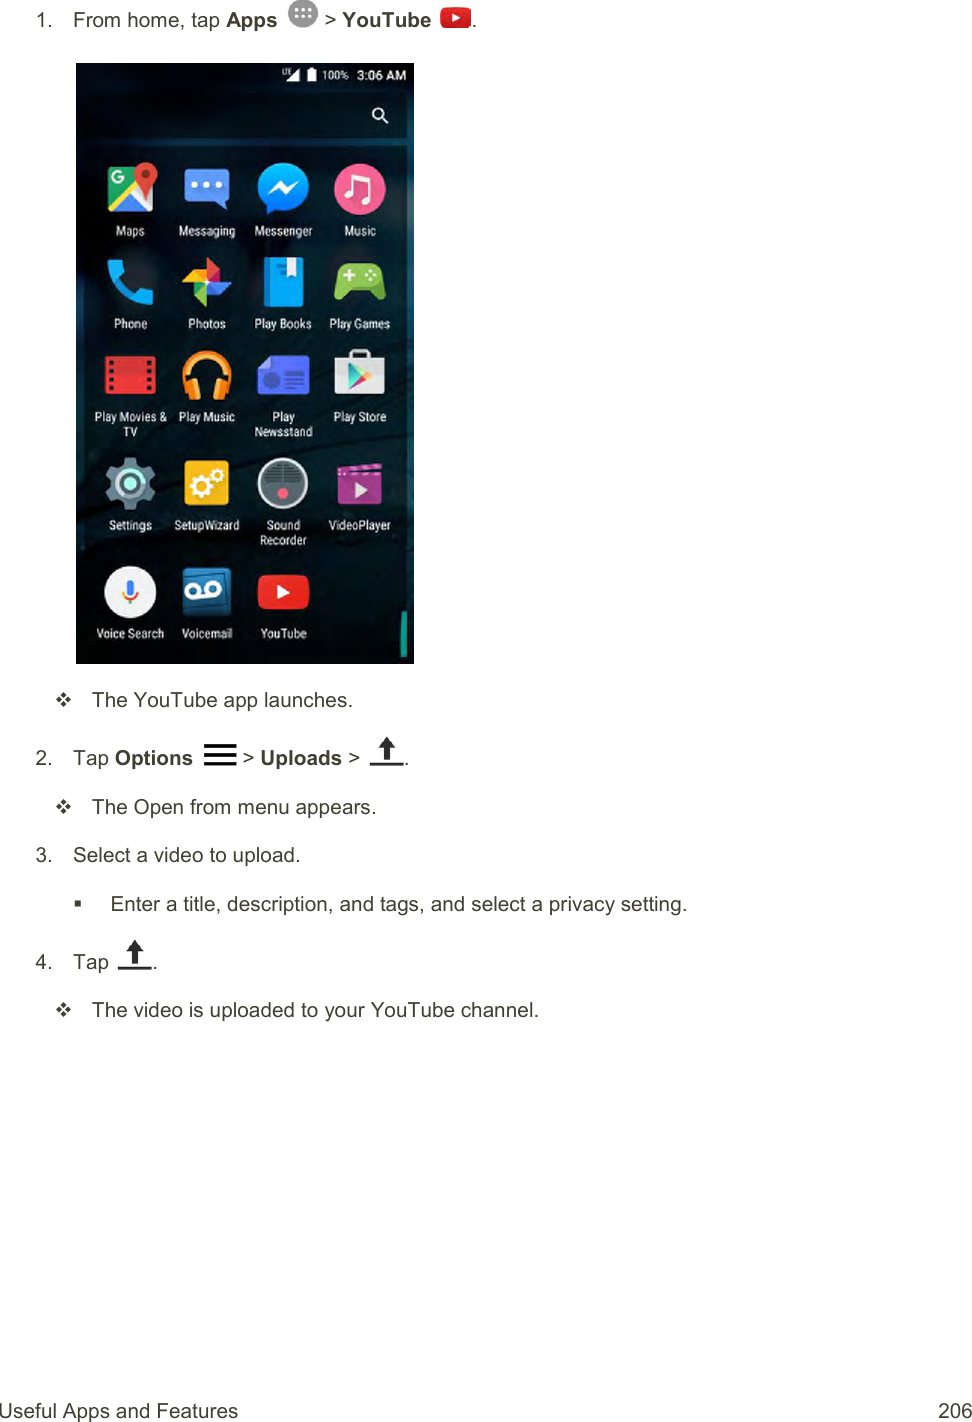 Useful Apps and Features  206 1.  From home, tap Apps   &gt; YouTube  .     The YouTube app launches. 2.  Tap Options   &gt; Uploads &gt;  .    The Open from menu appears. 3.  Select a video to upload.   Enter a title, description, and tags, and select a privacy setting. 4.  Tap  .   The video is uploaded to your YouTube channel. 